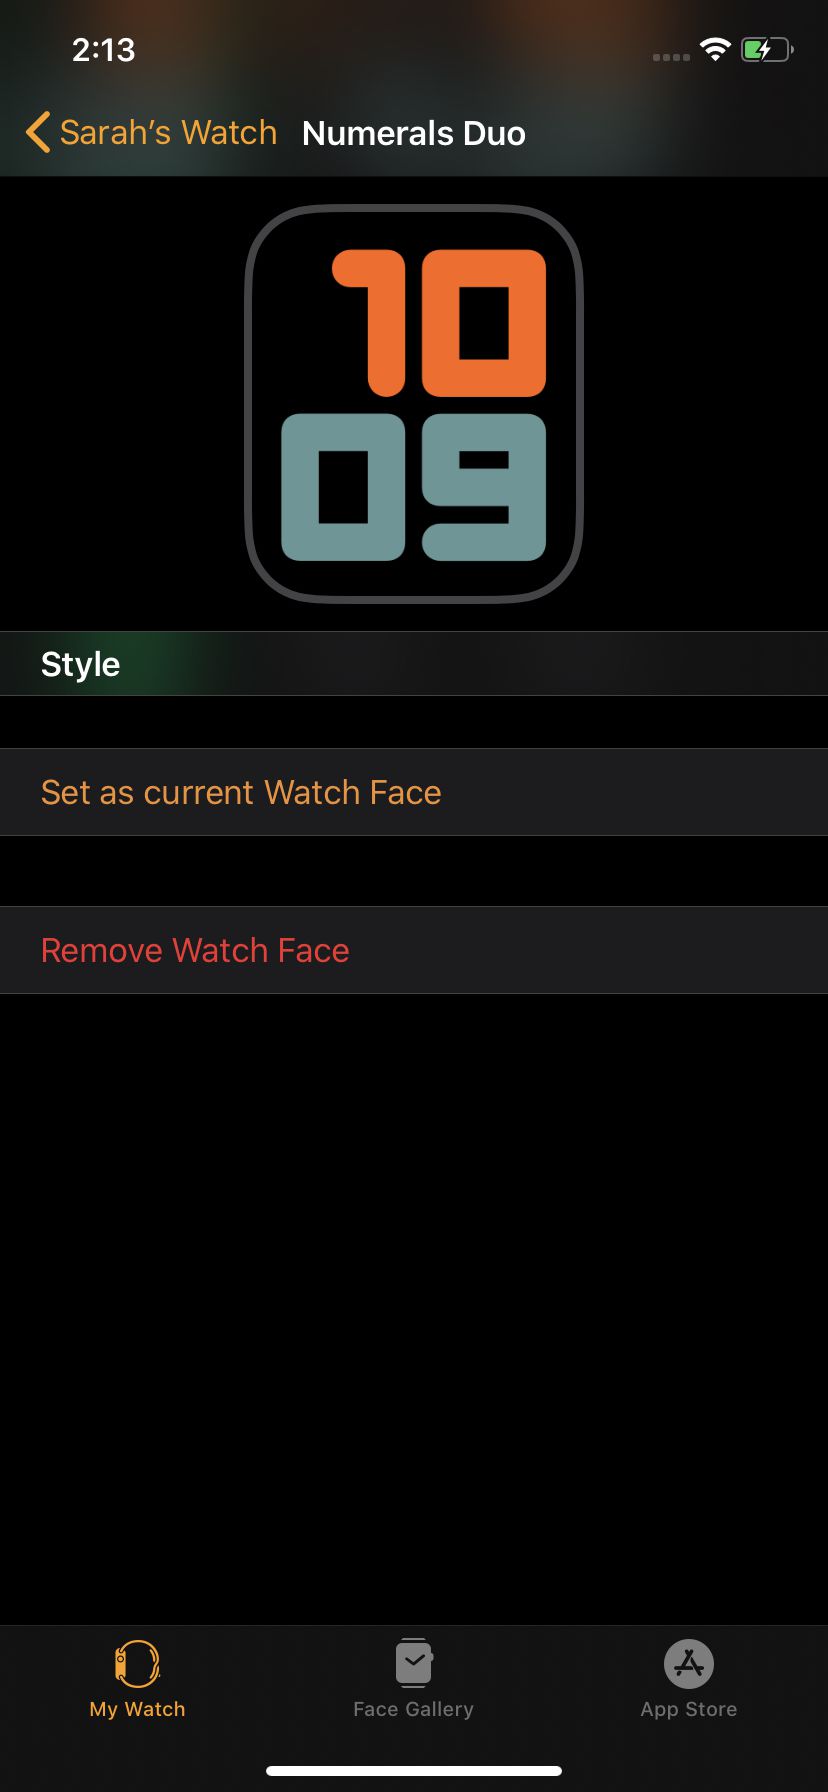 How To Add And Change Watchfaces On Your Apple Watch The Verge